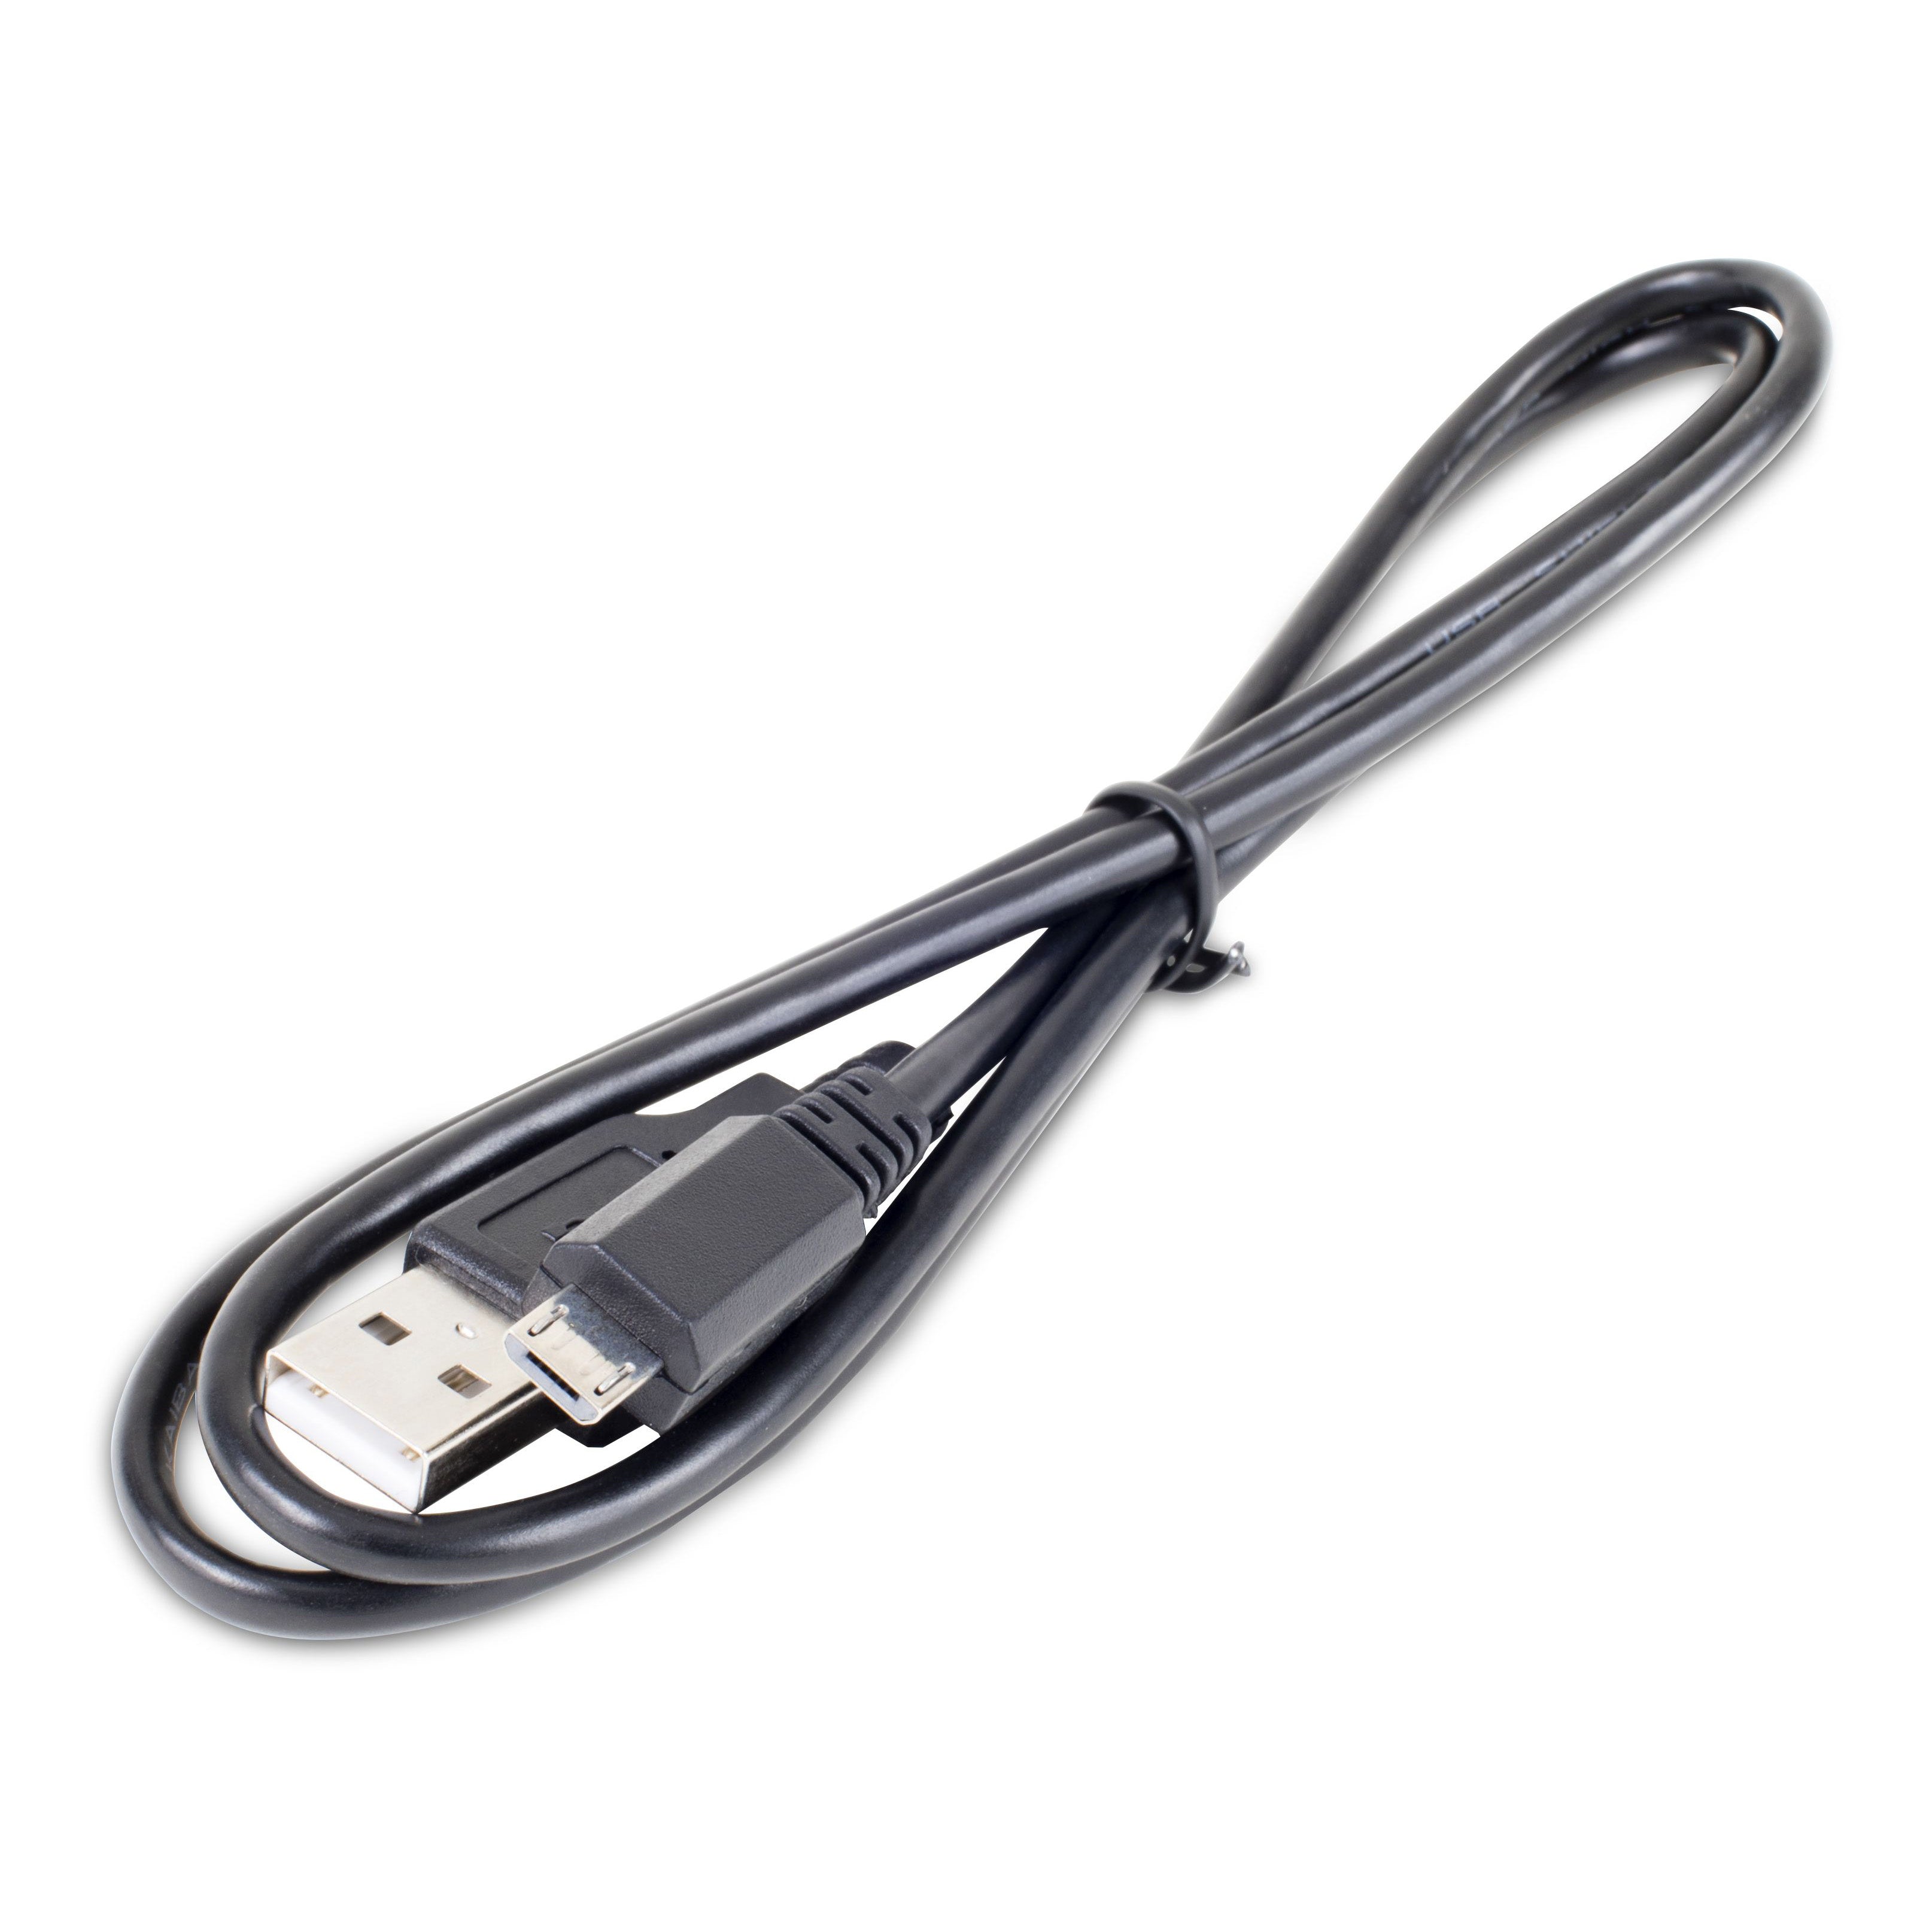 Apogee Cable for MiC Plus (1m, Micro-B to USB-A)